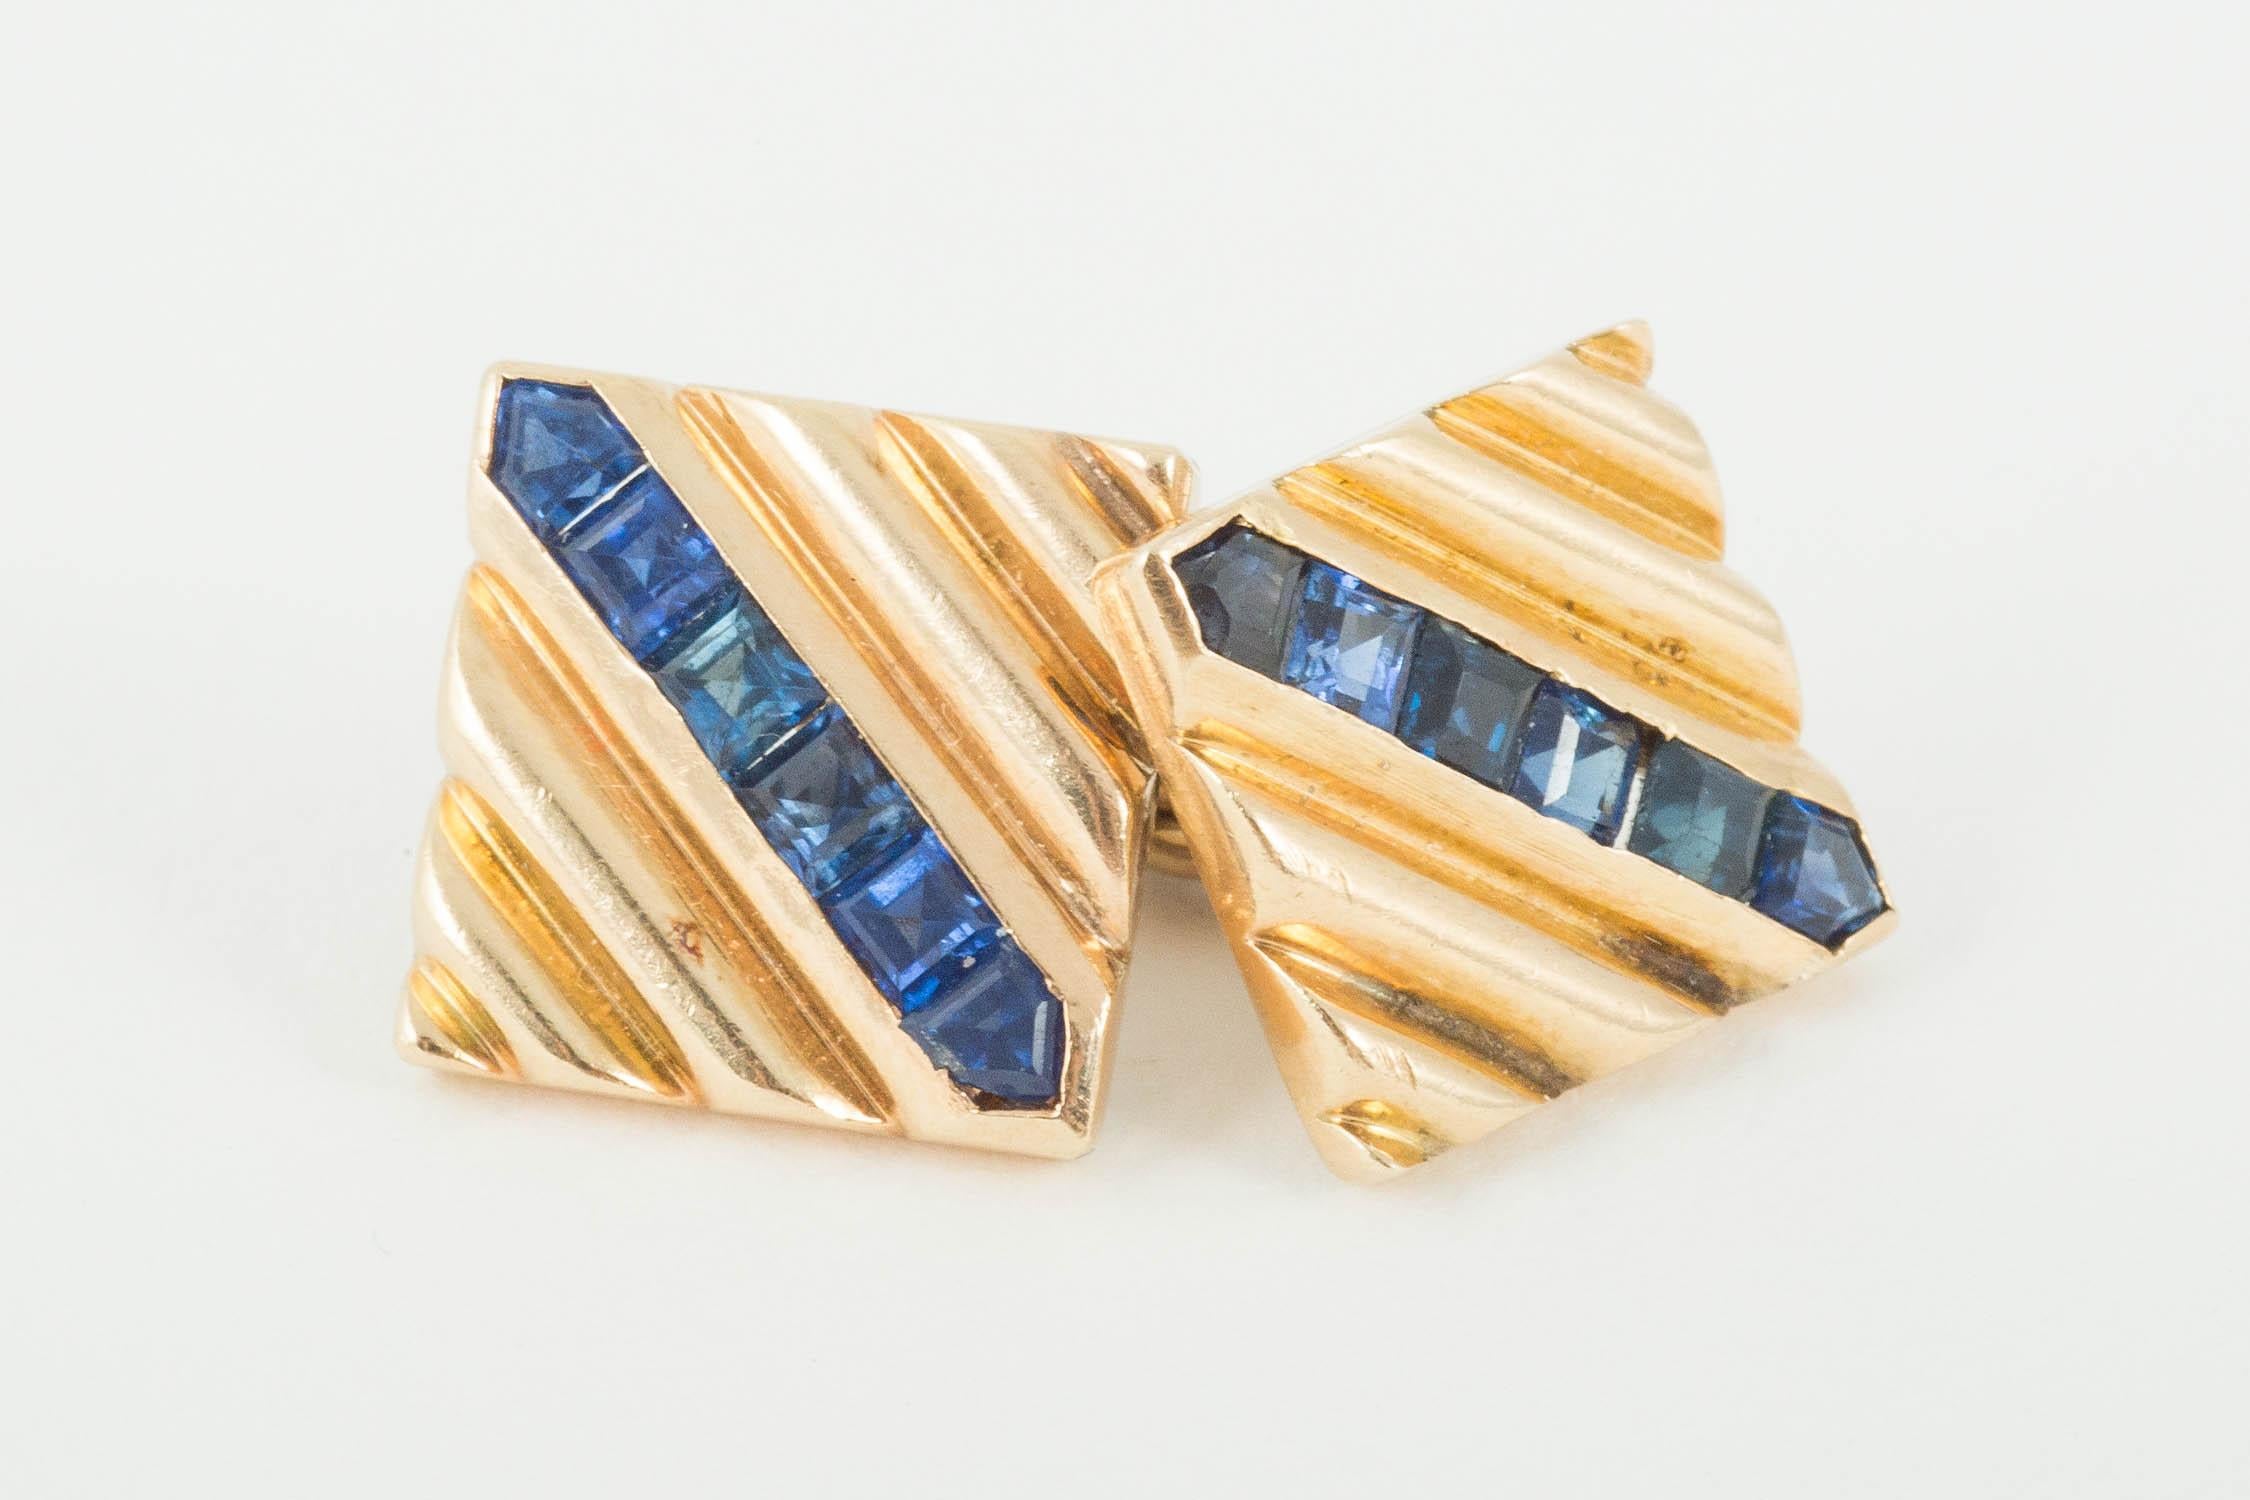 A heavy pair of 14 karat Gold square cufflinks of ribbed design,set with a diagonal line of fine colouredsapphires,chain link connections. Size 12 mm across circa 1950
A heavy pair of double sided, 14 karat yellow gold cufflinks of ribbed design,